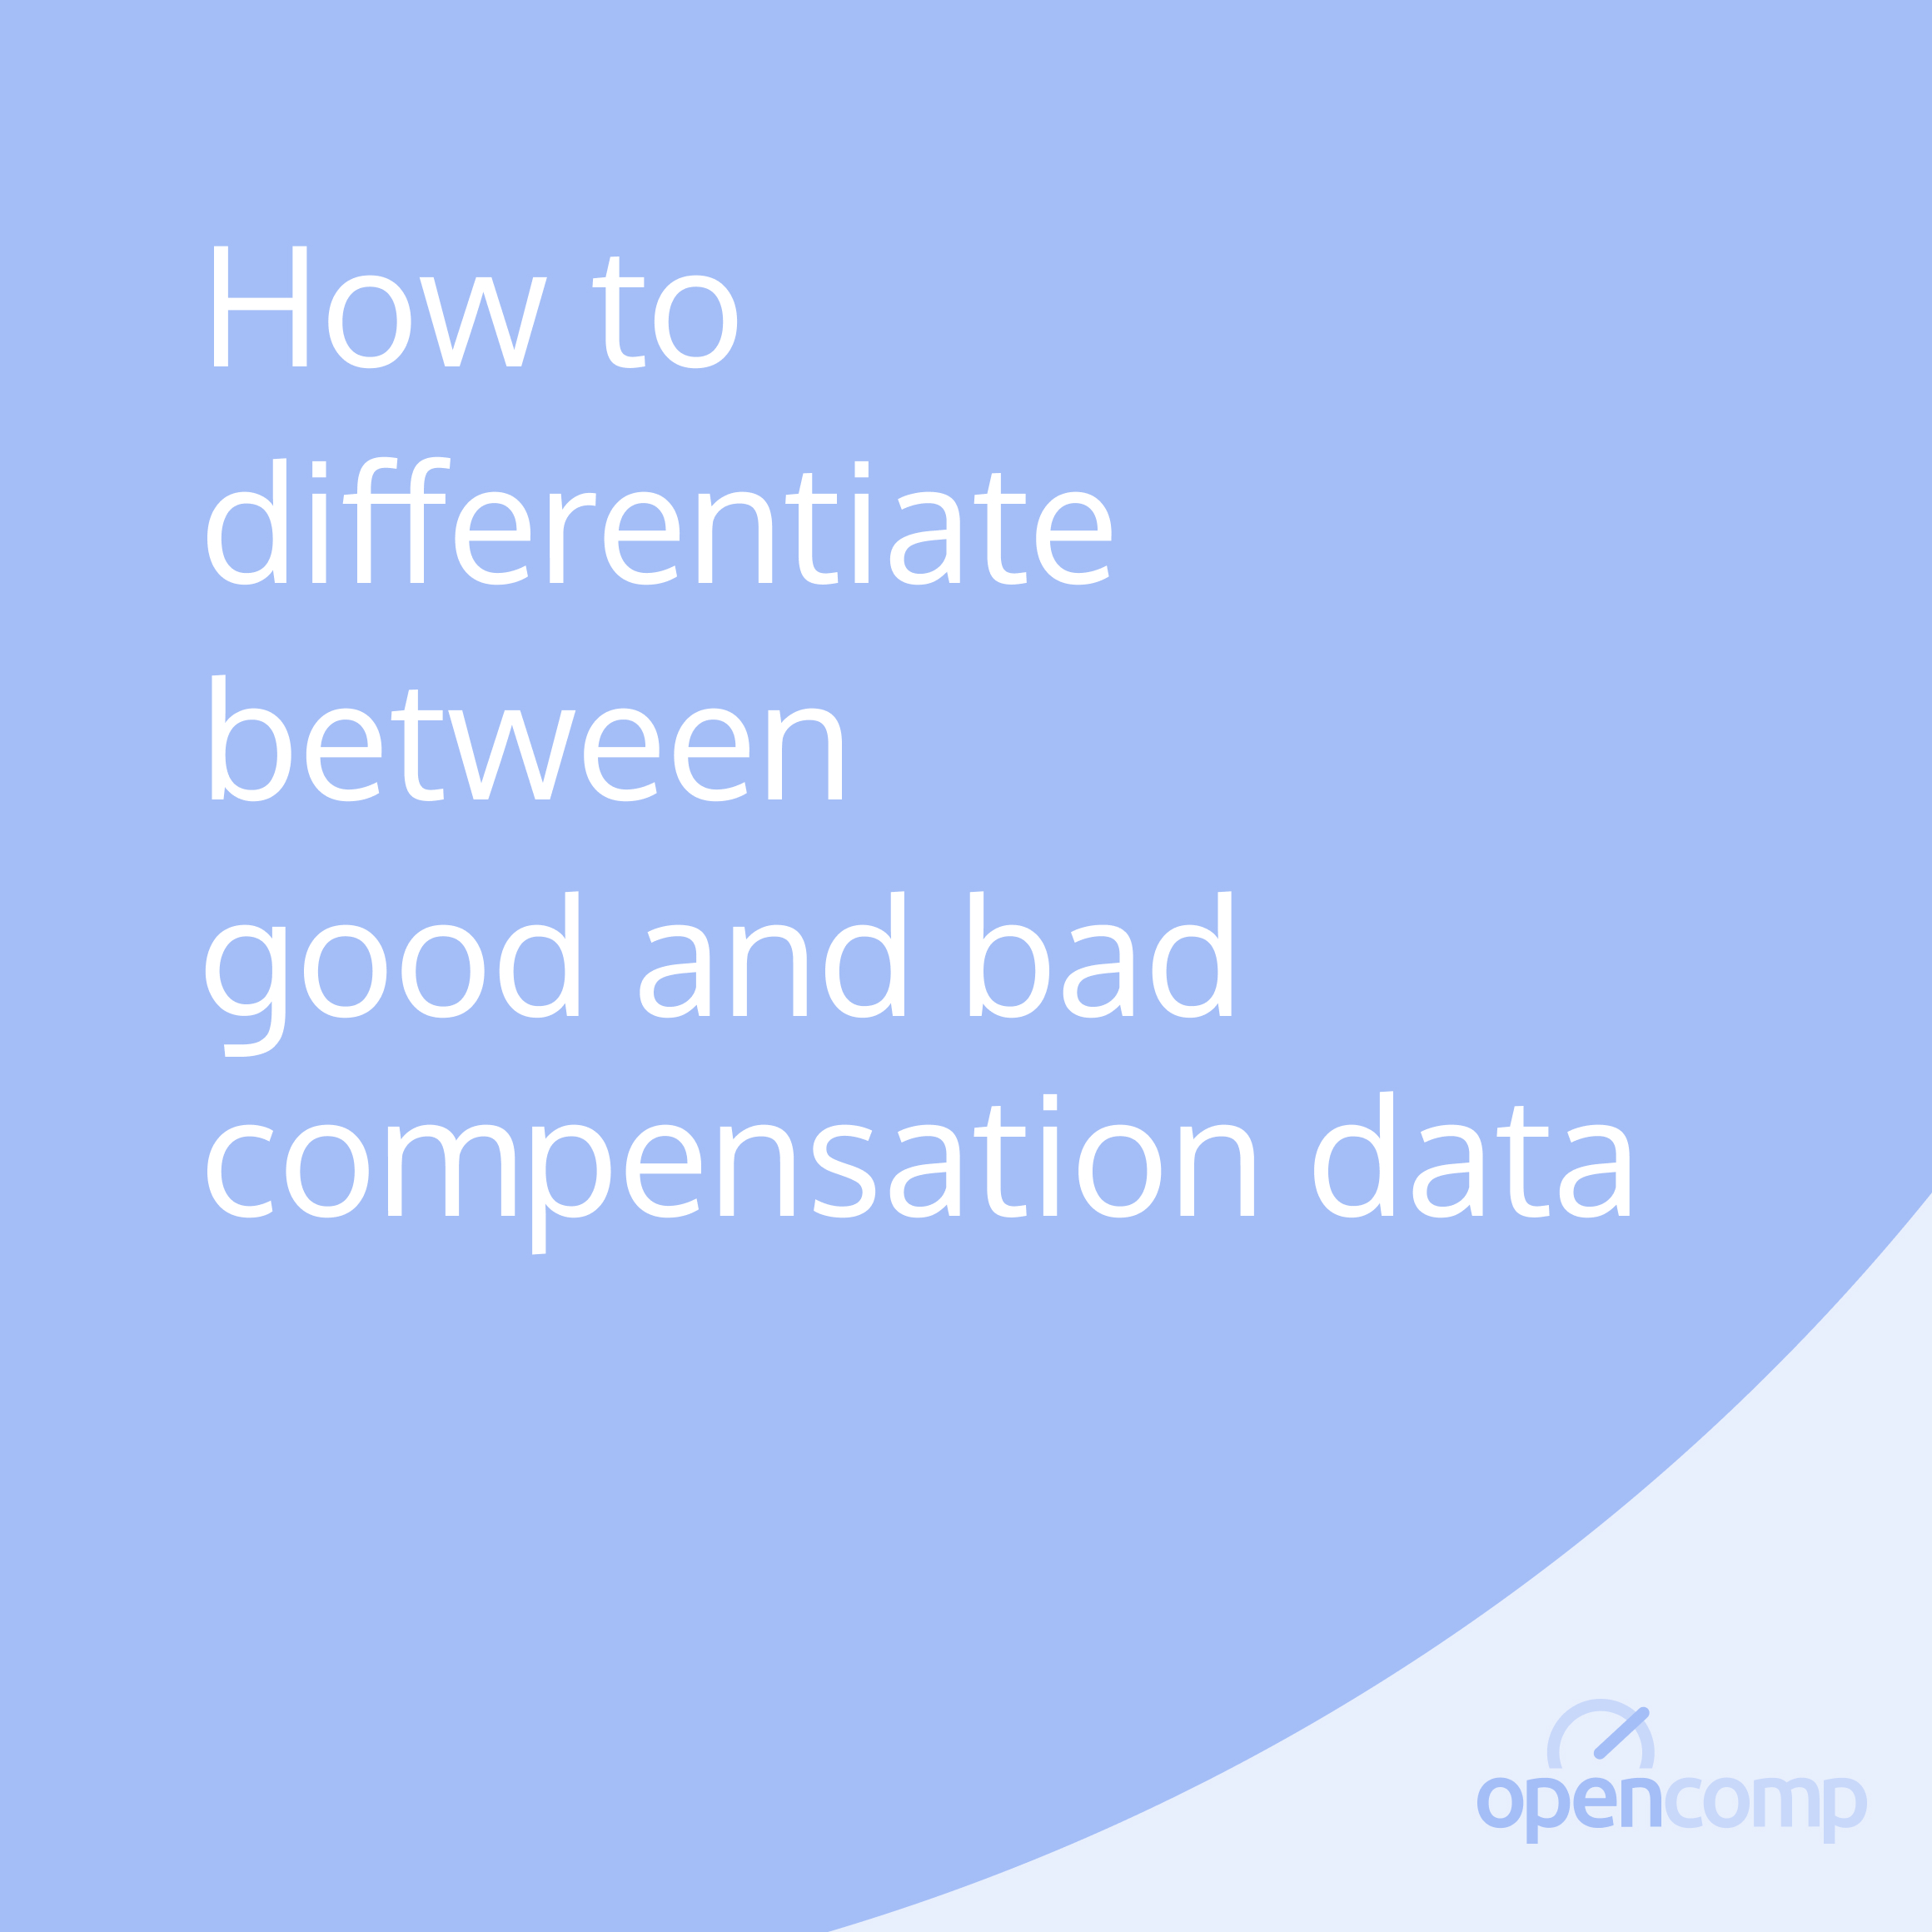 How to differentiate between good and bad compensation data